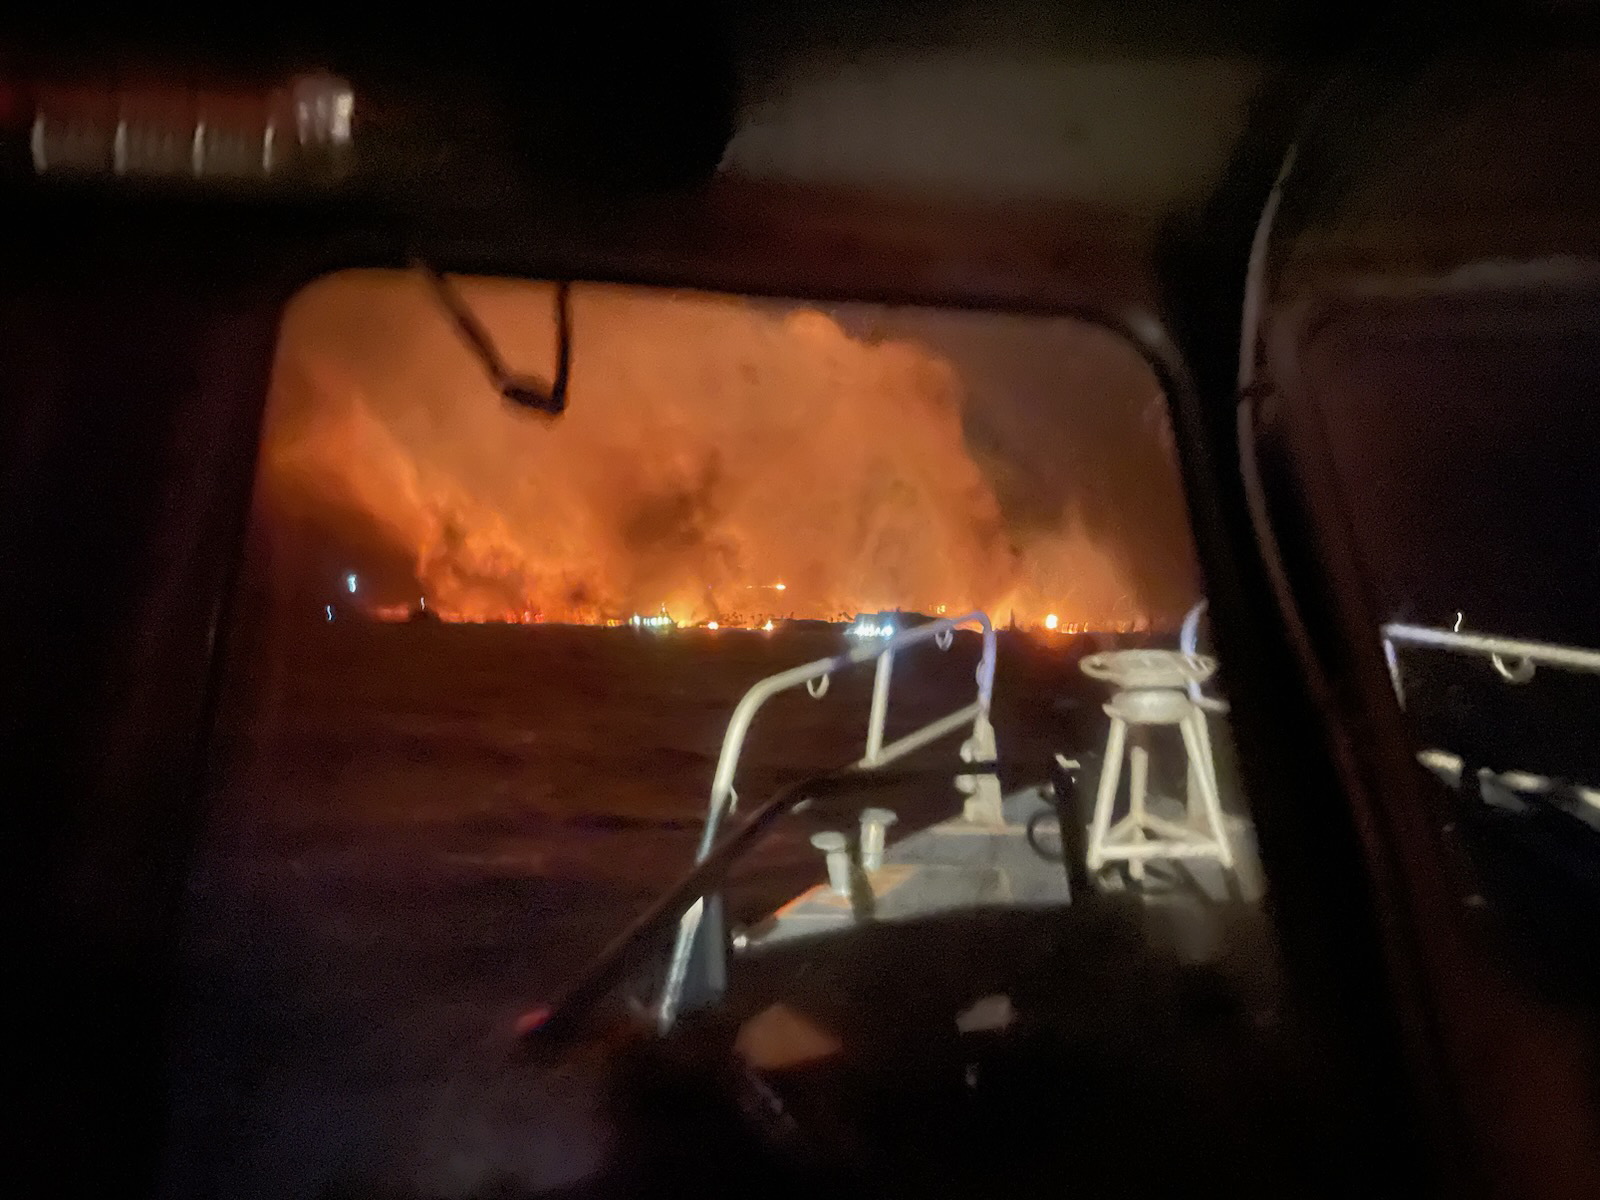 epa10795148 A handout photo made available by the United States Coast Guard (USCG) shows USCG crews responding from the ocean to the Lahaina wildfires in Maui, Hawaii, USA, 09 August 2023 (issued 11 August 2023). According to Coast Guard Station Maui, a total of 17 lives were saved from the water and 40 survivors were located ashore by boat crews. At least 53 people were killed in the wildfires buring in Maui, which is considered the largest natural disaster in Hawaii's state history, according to a statement by Hawaii Governor Josh Green. Hundreds of buildings on the island were destroyed and thousands of people were evacuated. On 10 August, US President Biden declared Hawaii wildfires a 'major disaster' and ordered federal aid to supplement state and local recovery efforts in the affected areas.  EPA/PO3 DAVID GRAHAM/US COAST GUARD HANDOUT -- BEST QUALITY AVAILABLE -- HANDOUT EDITORIAL USE ONLY/NO SALES